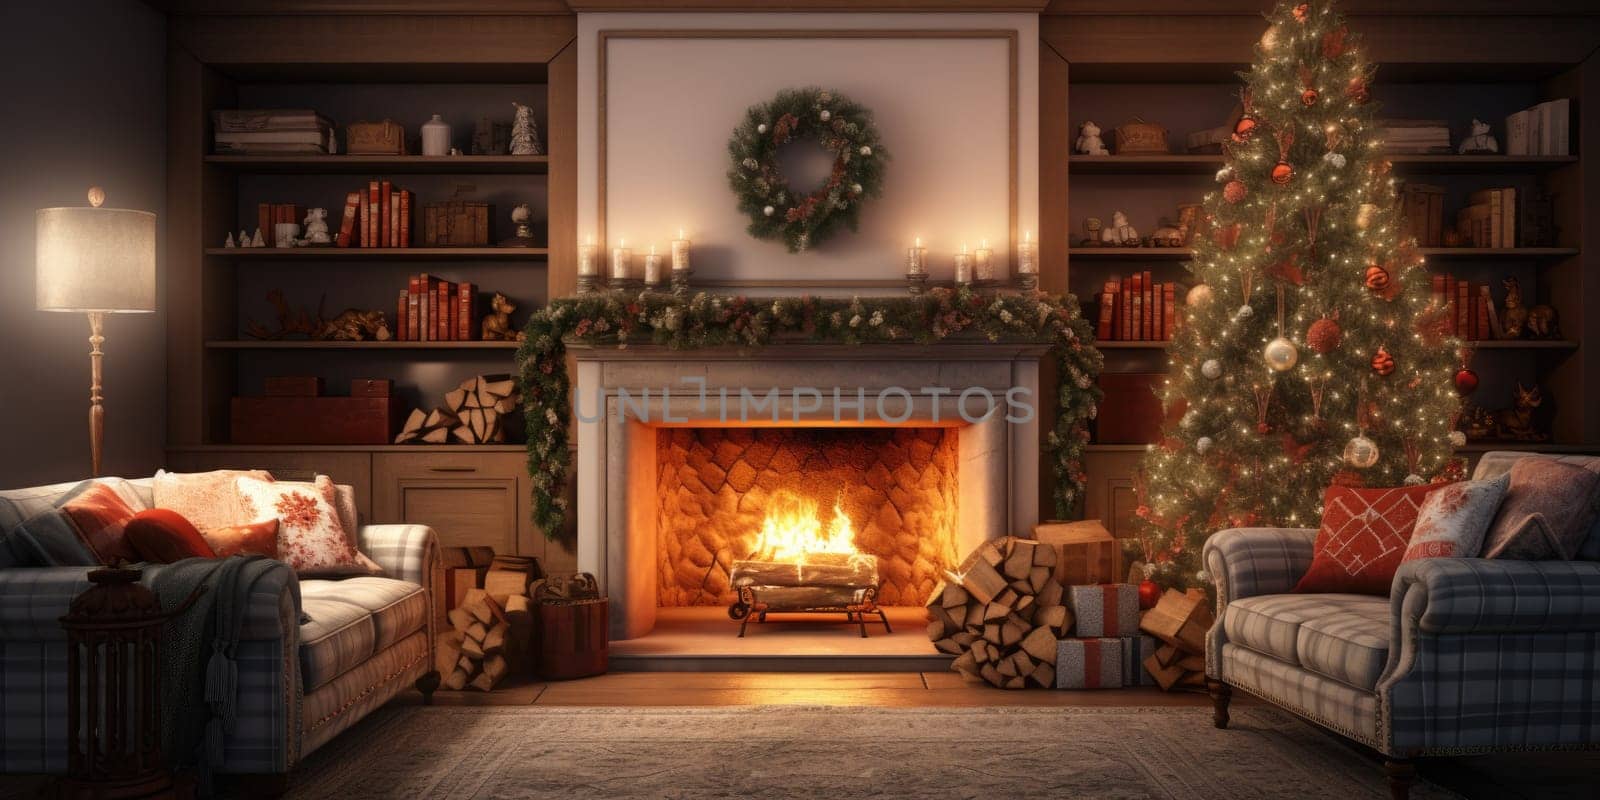 Interior of decorated living room with Christmas tree and sofa comeliness by biancoblue